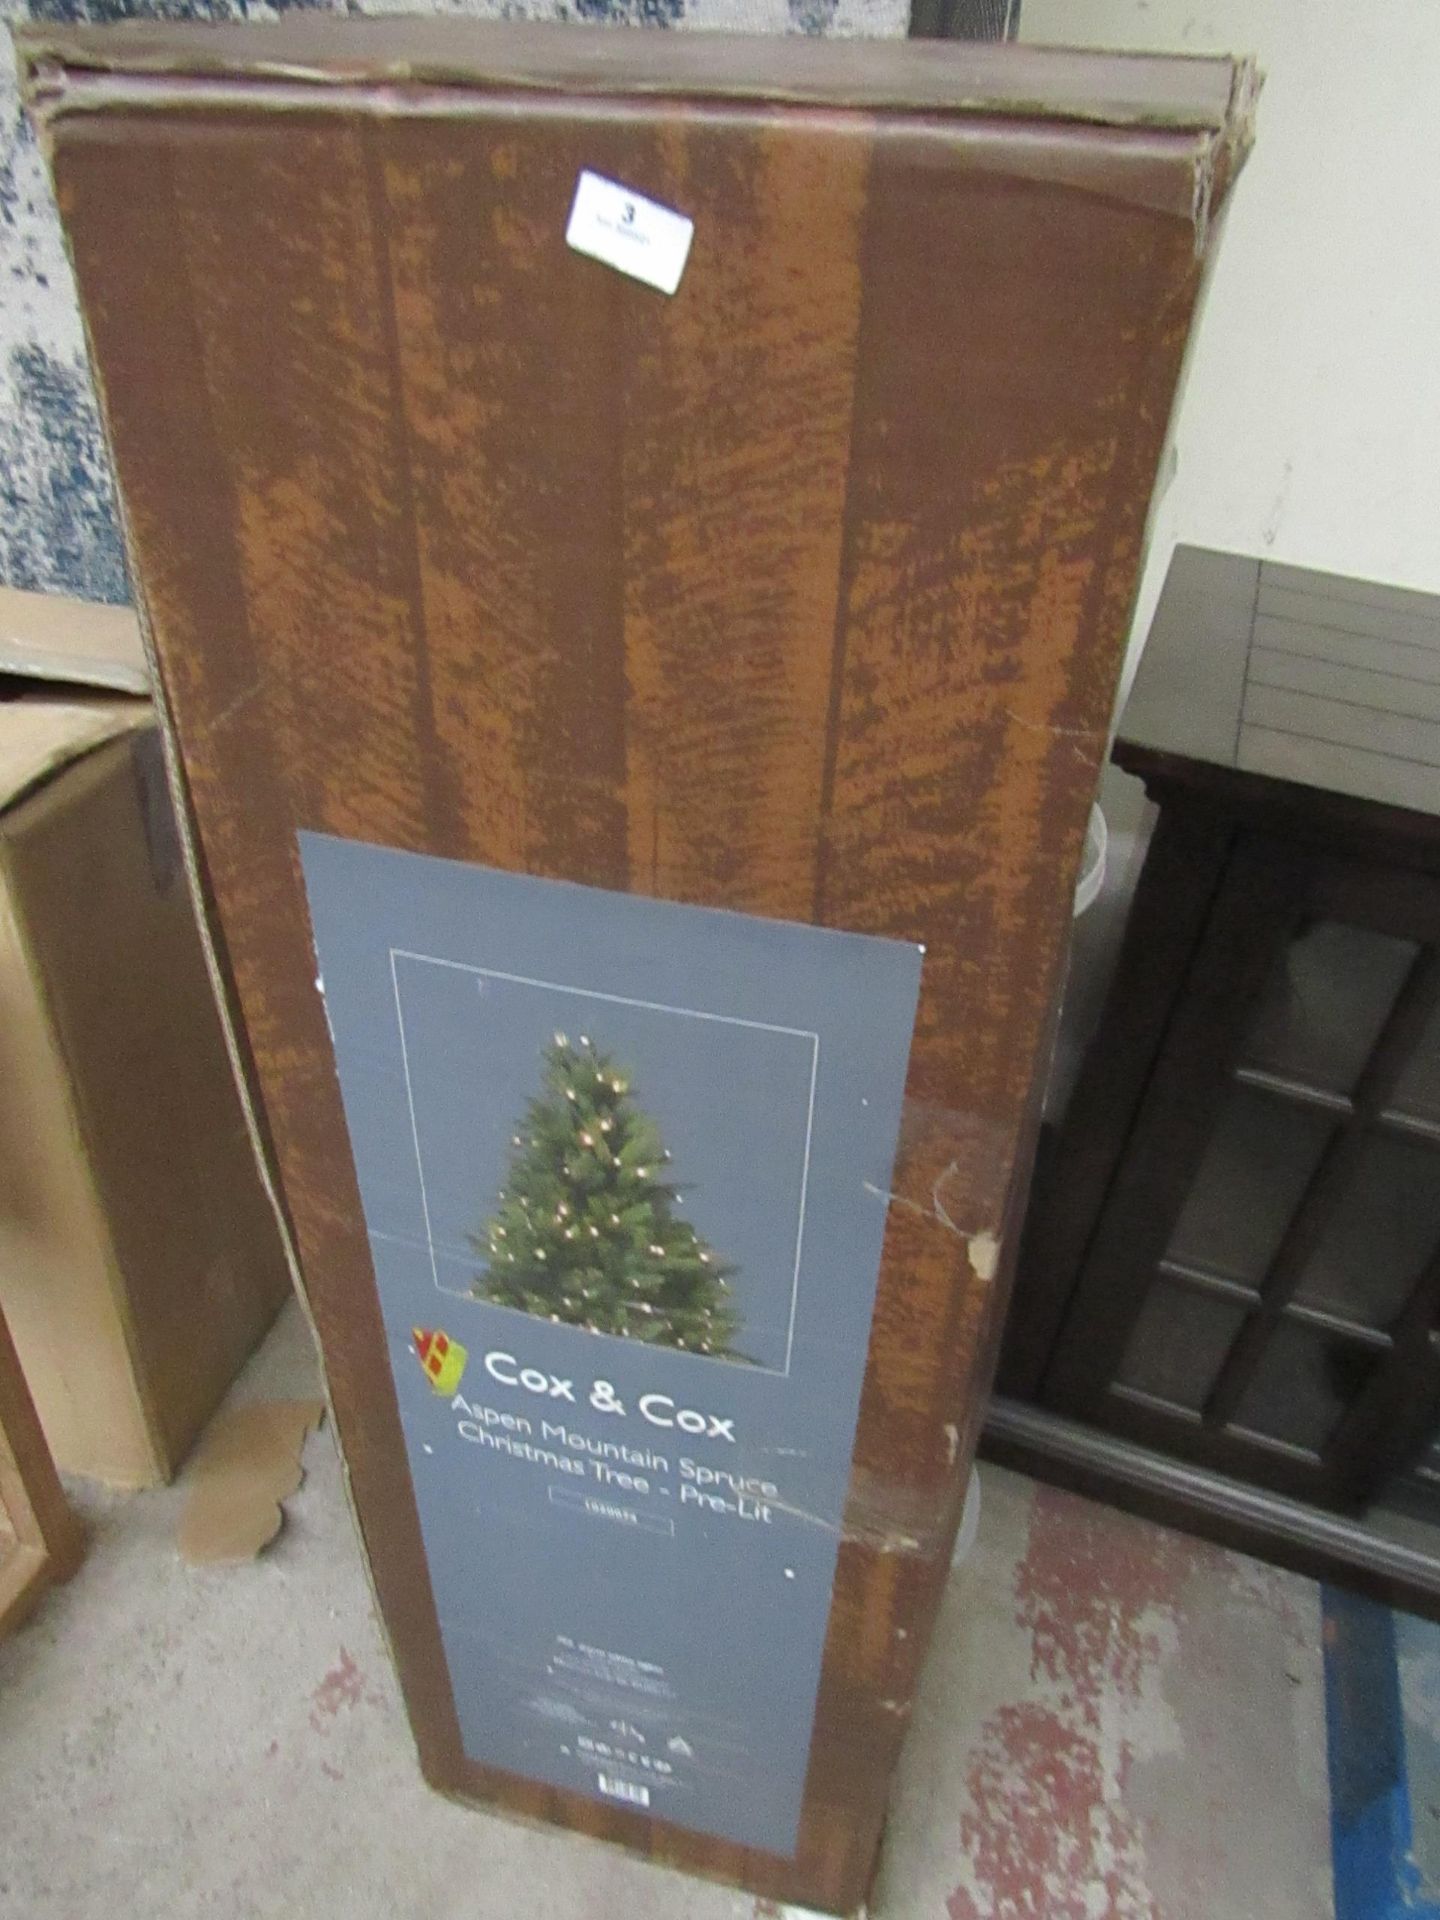 | 1x | COX & COX ASPEN MOUNTAIN SPRUCE CHRISTMAS TREE - PRE-LIT | UNCHECKED & BOXED | RRP £300 |